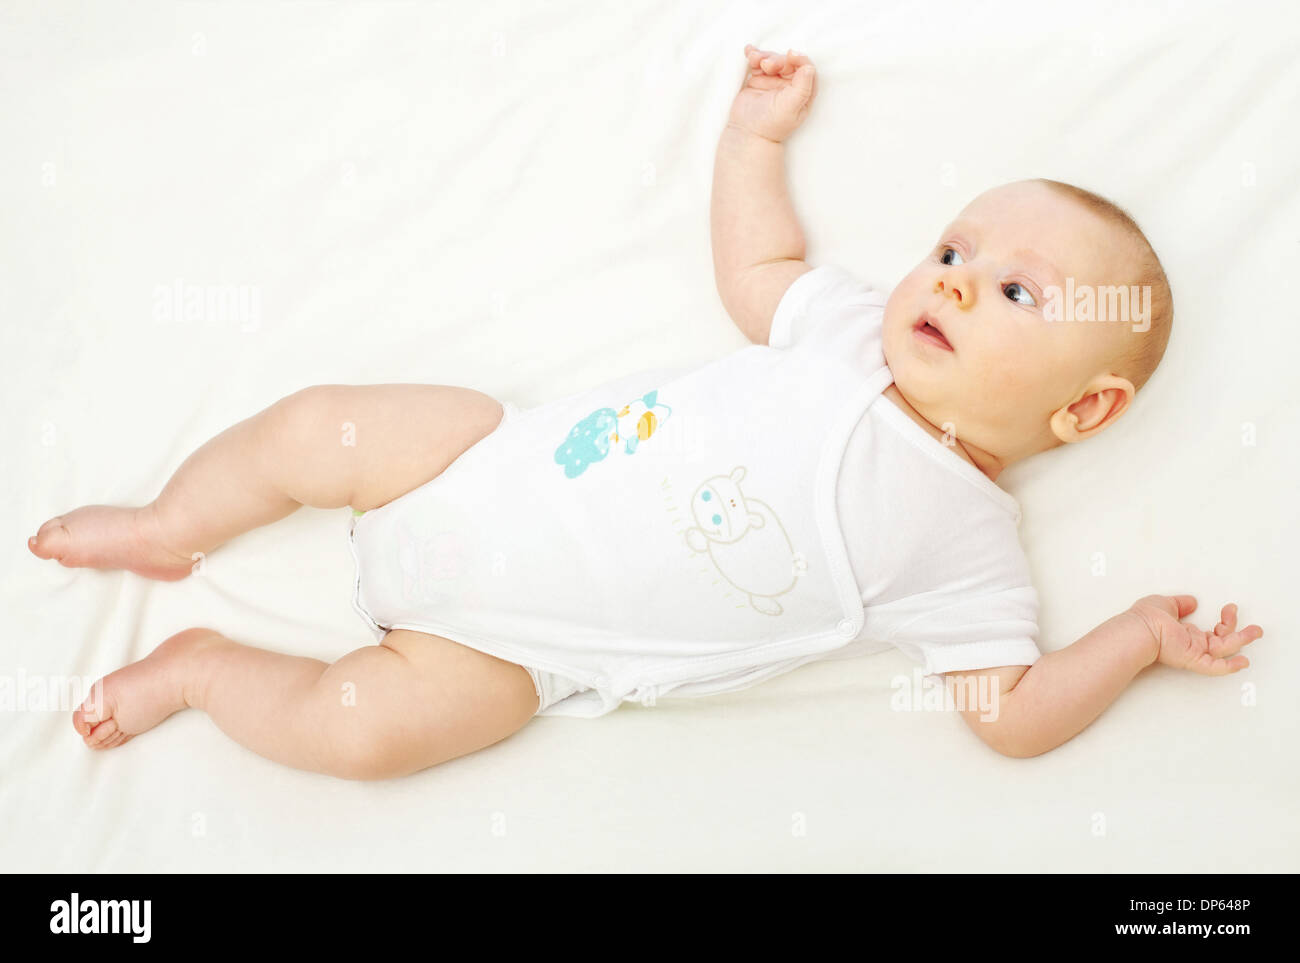 portrait of young baby on white blanket Stock Photo